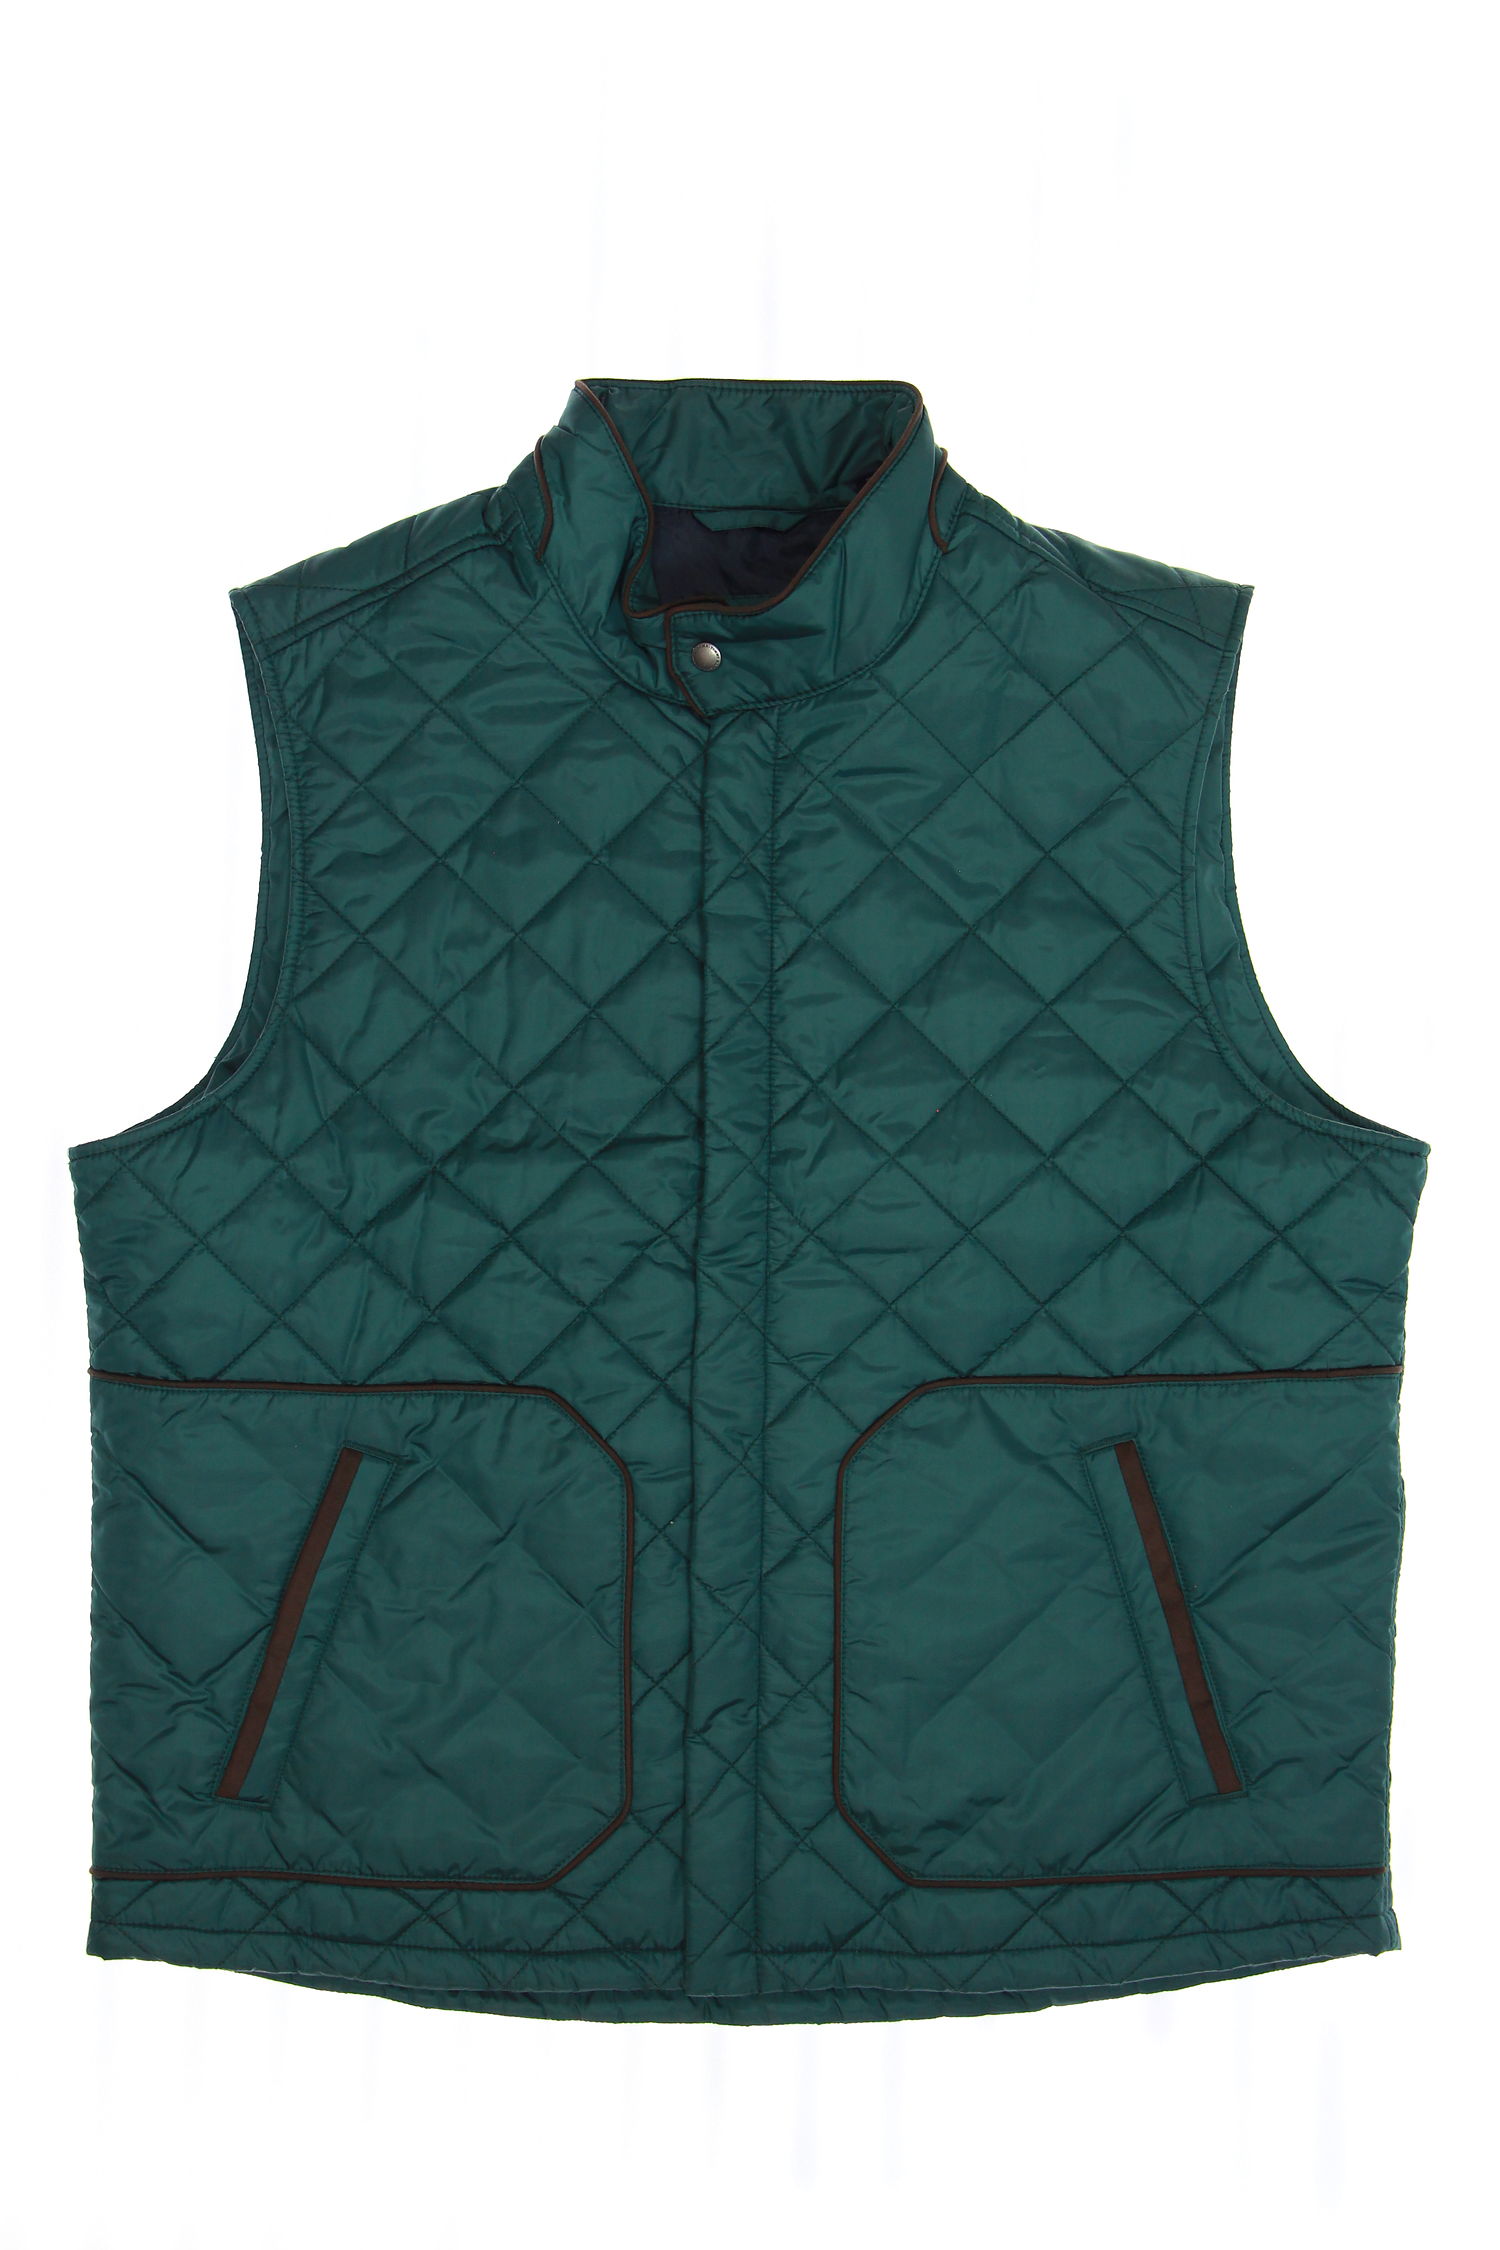 Tommy Bahama Mens Green Insulated Vest